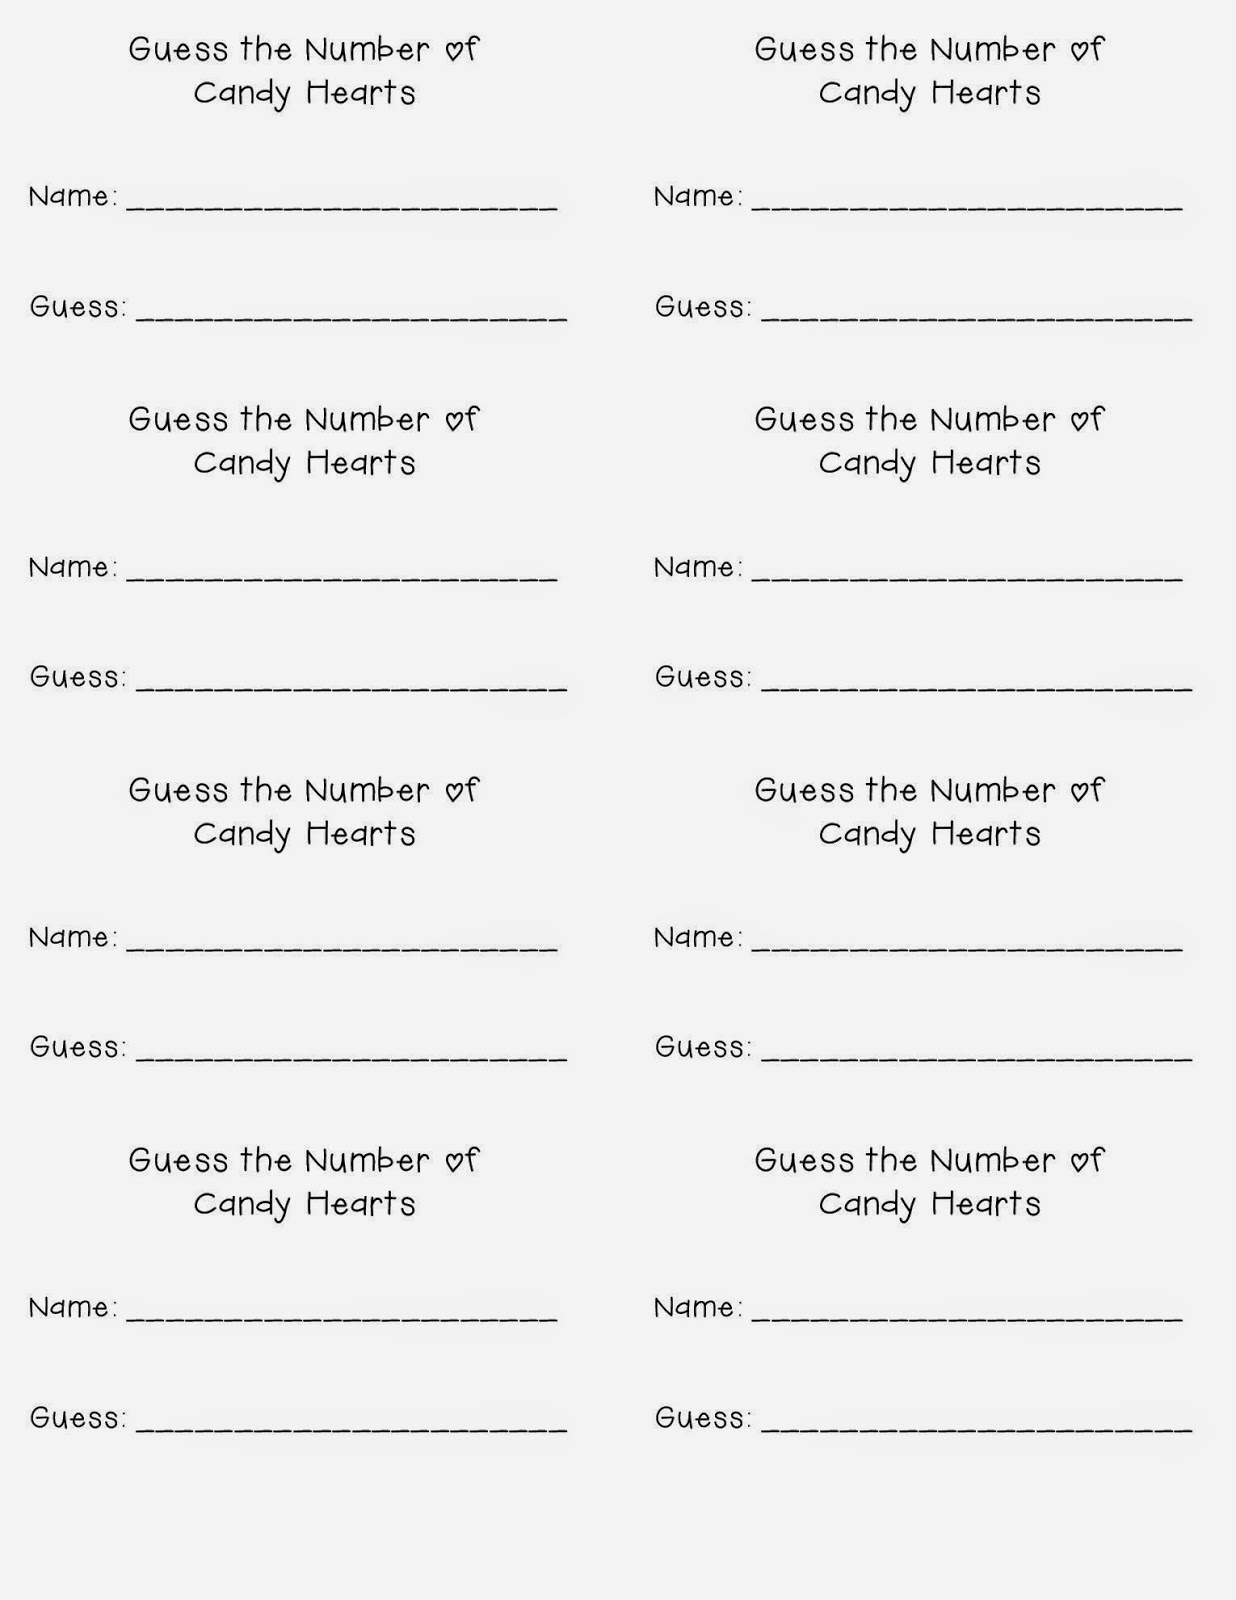 free-printable-guess-how-many-sweets-in-the-jar-template-printable